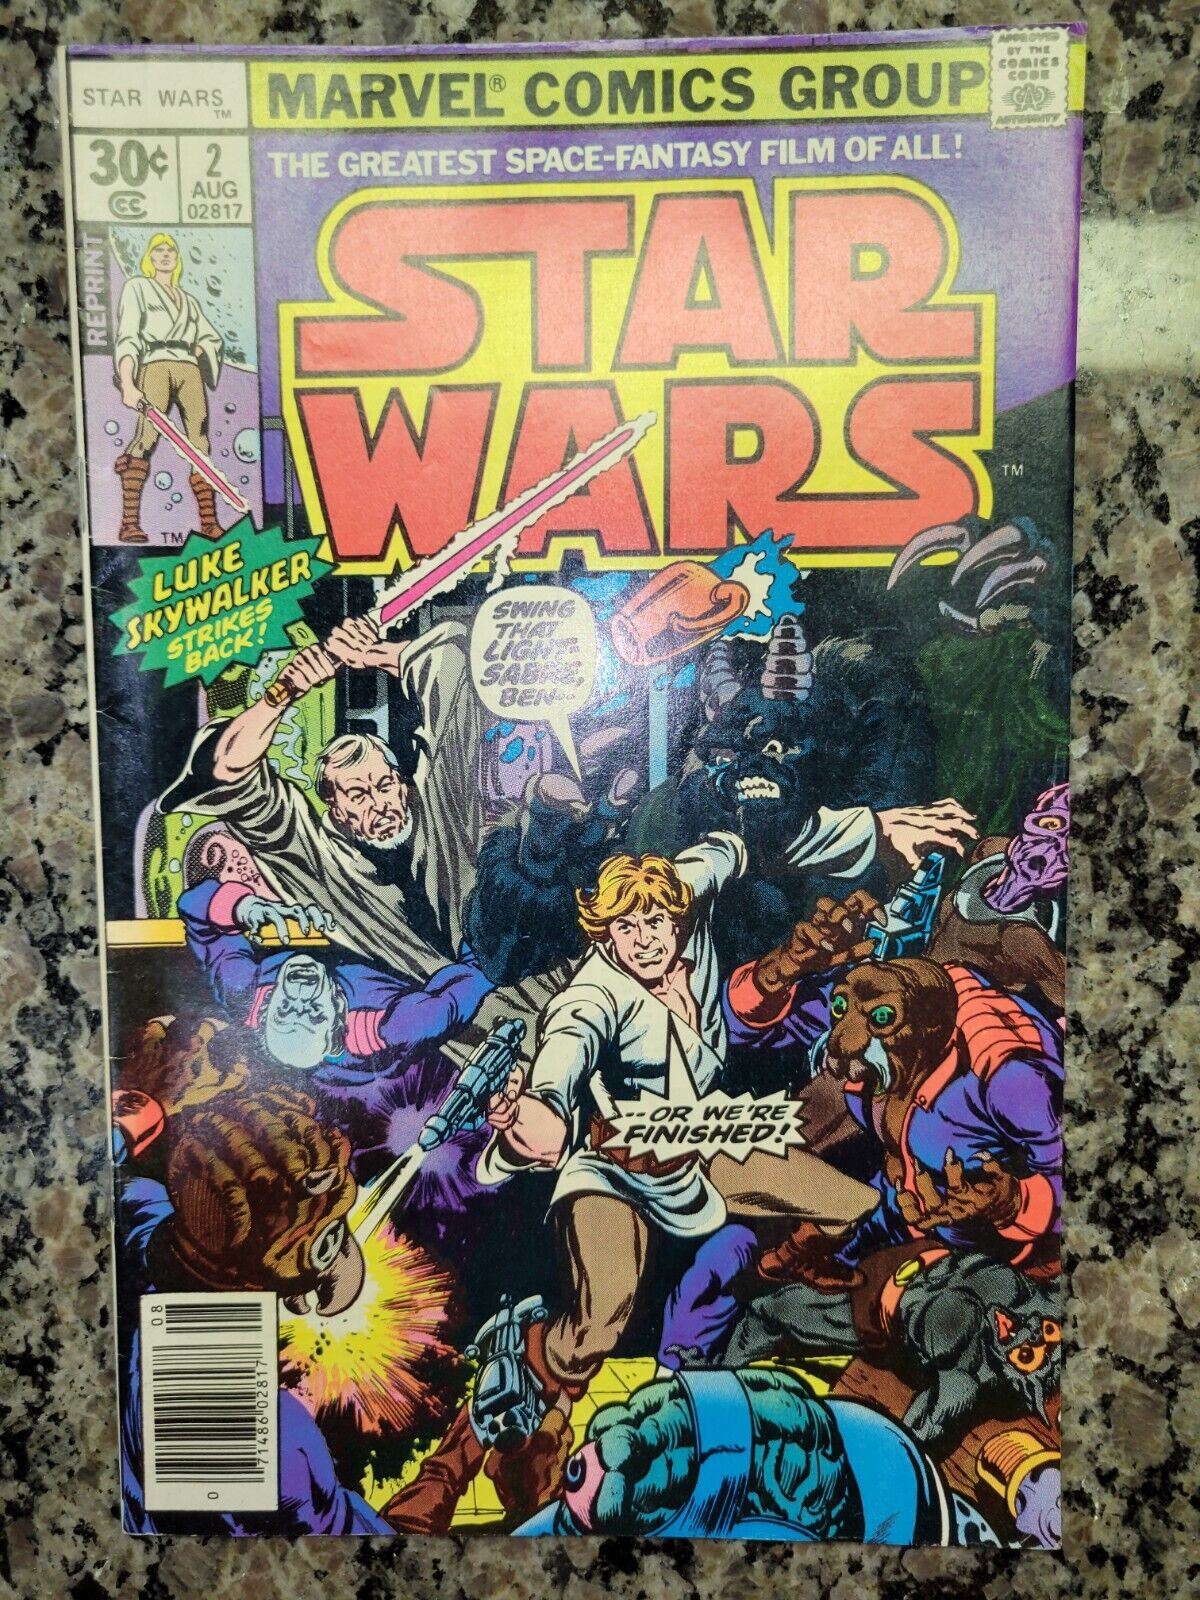 STAR WARS #2, VF+ (8.5), 1977, Marvel,1st Appearance of Han Solo and Chewbacca